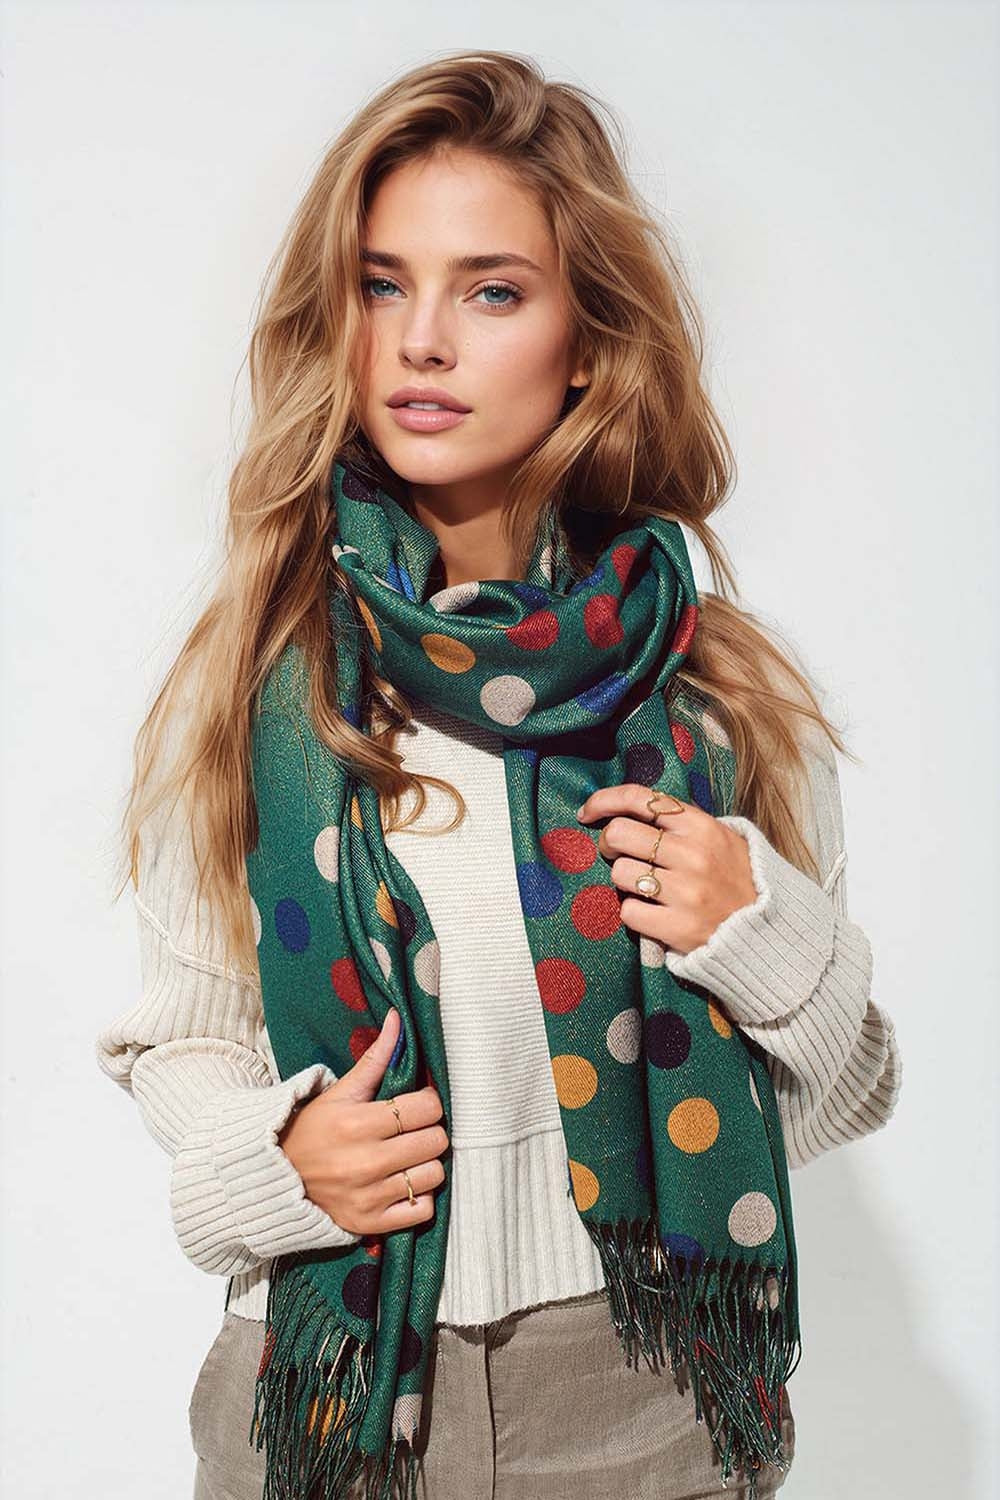 Multicolored Polka Dot soft Scarf in Green